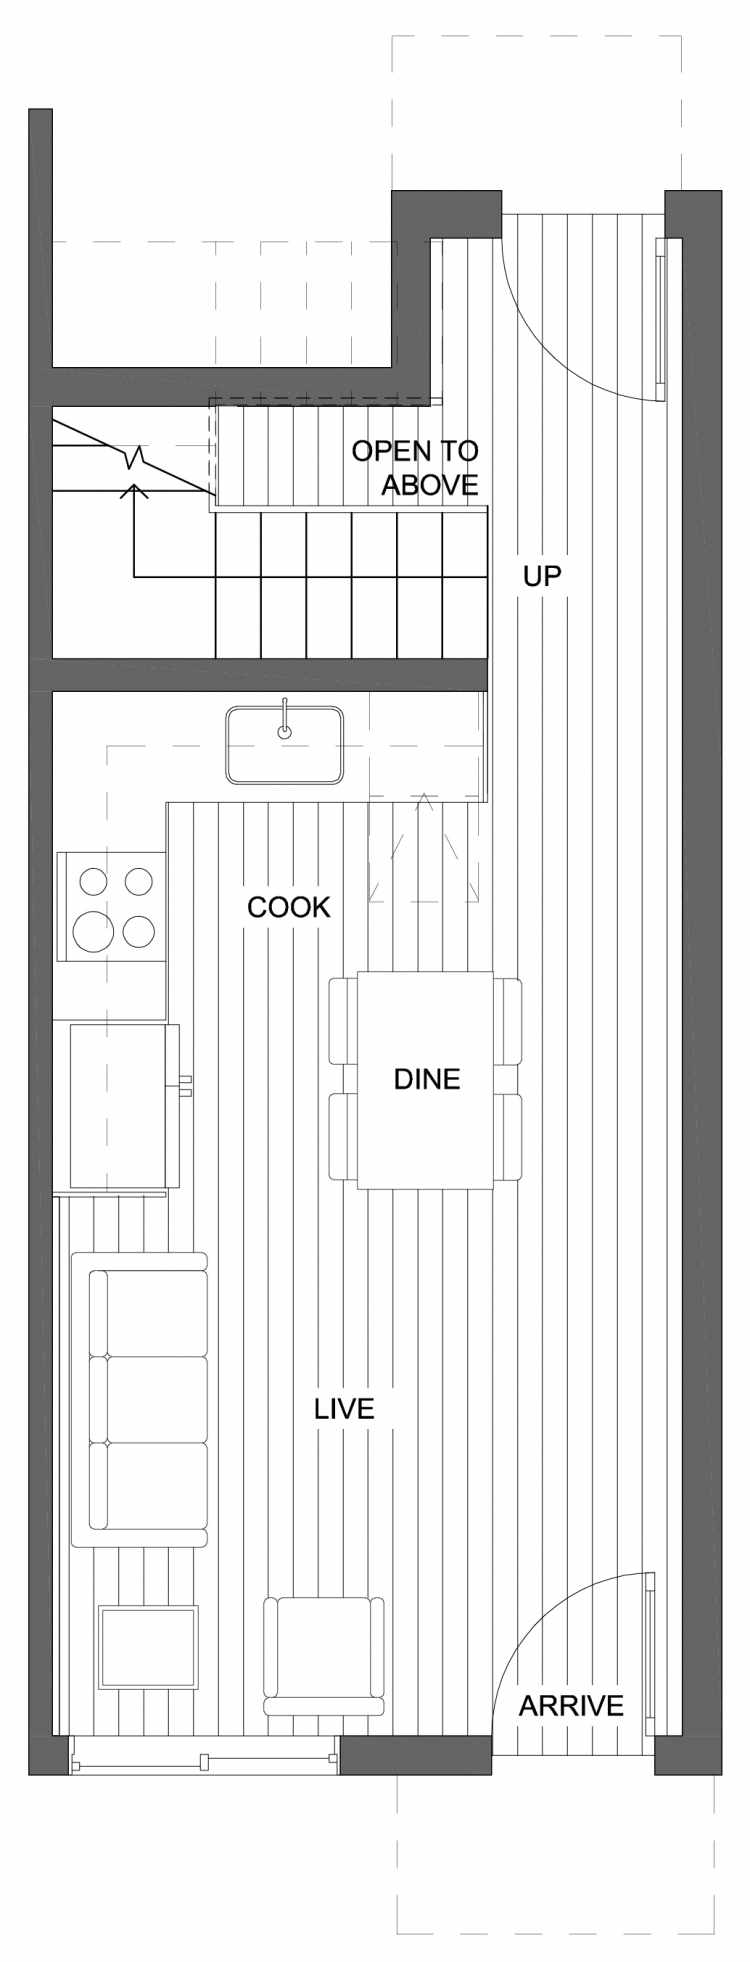 First Floor Plan of 10427 Alderbrook Pl NW, One of the Zinnia Townhomes in the Greenwood Neighborhood of Seattle